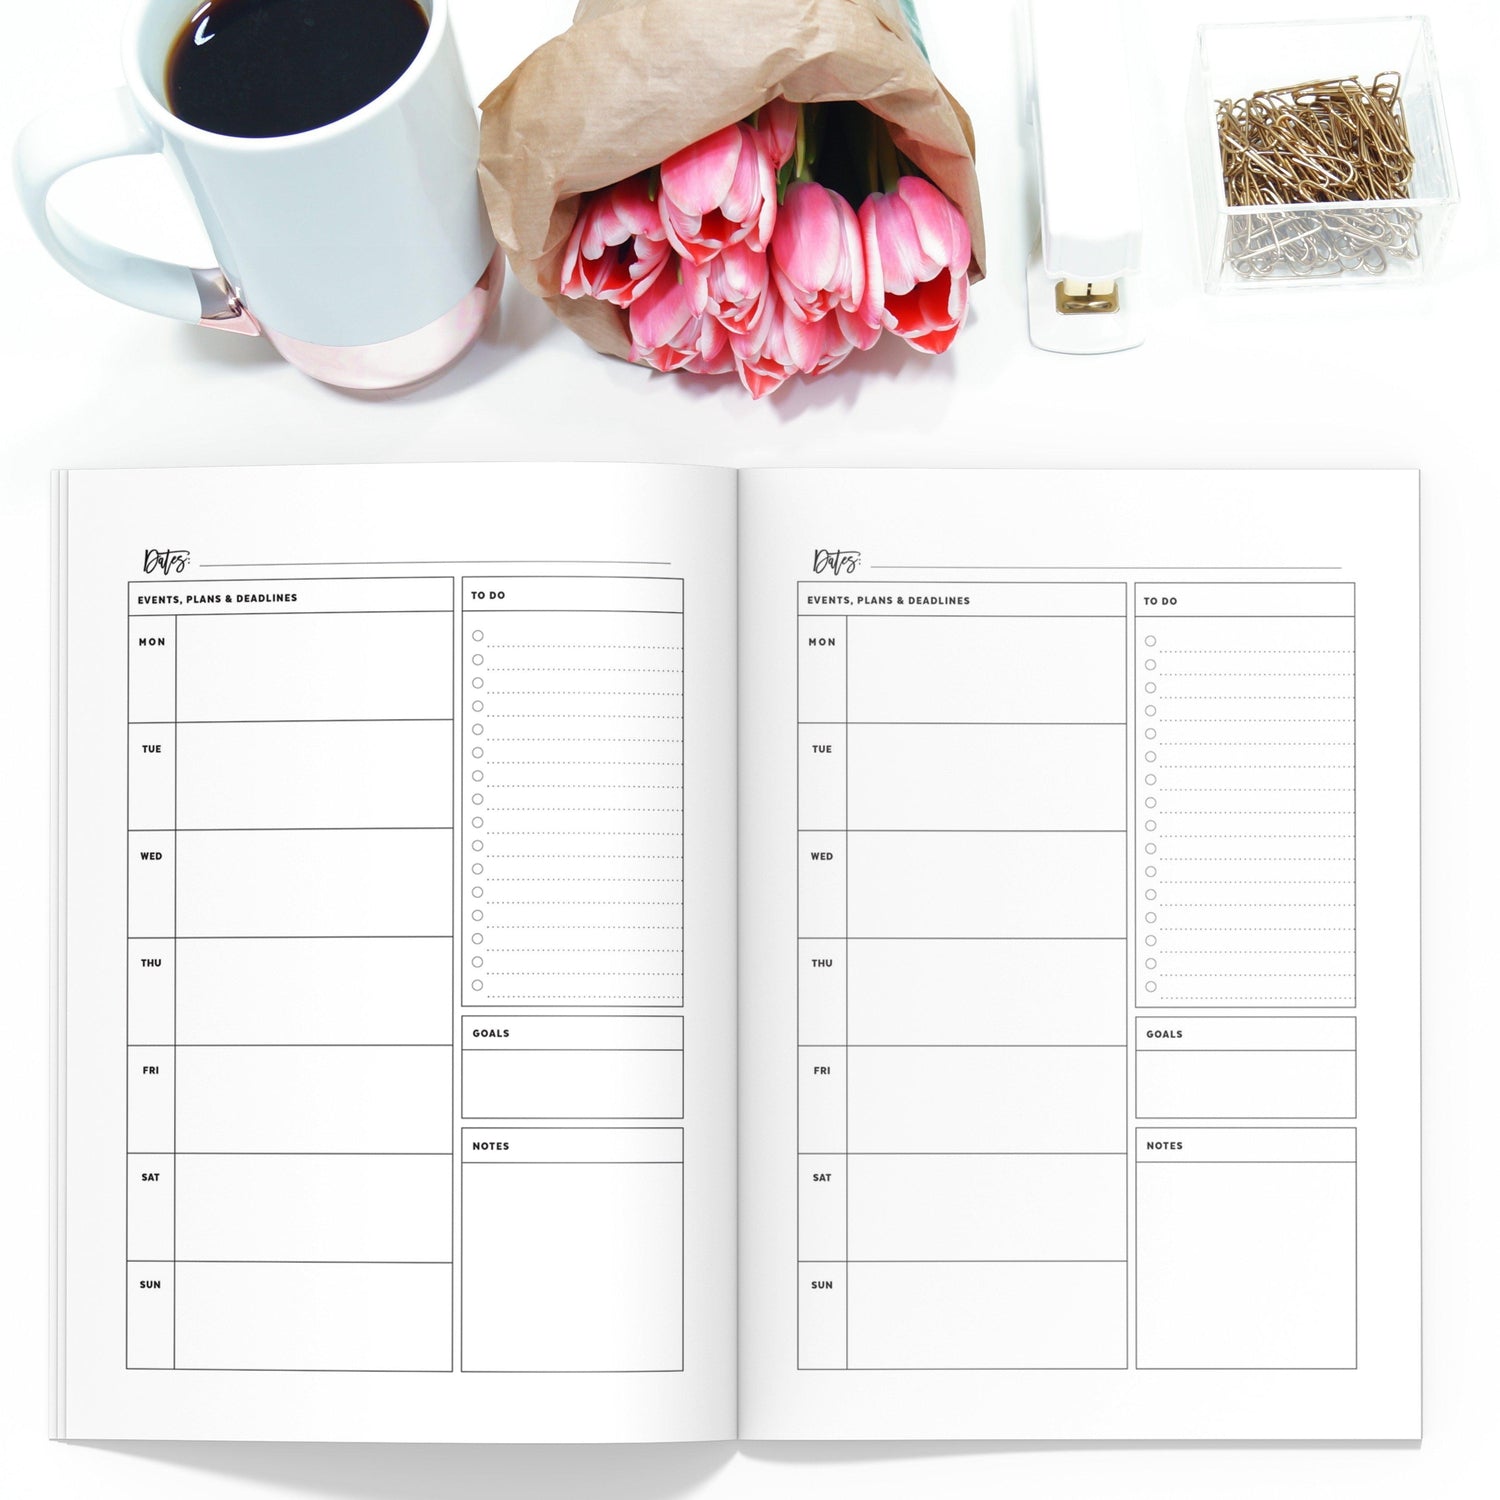 Travelers Notebook Inserts - 2 Pack, 26 Weeks Per Book, Free Diary Weekly  Planner Refills with 6 Mon…See more Travelers Notebook Inserts - 2 Pack, 26